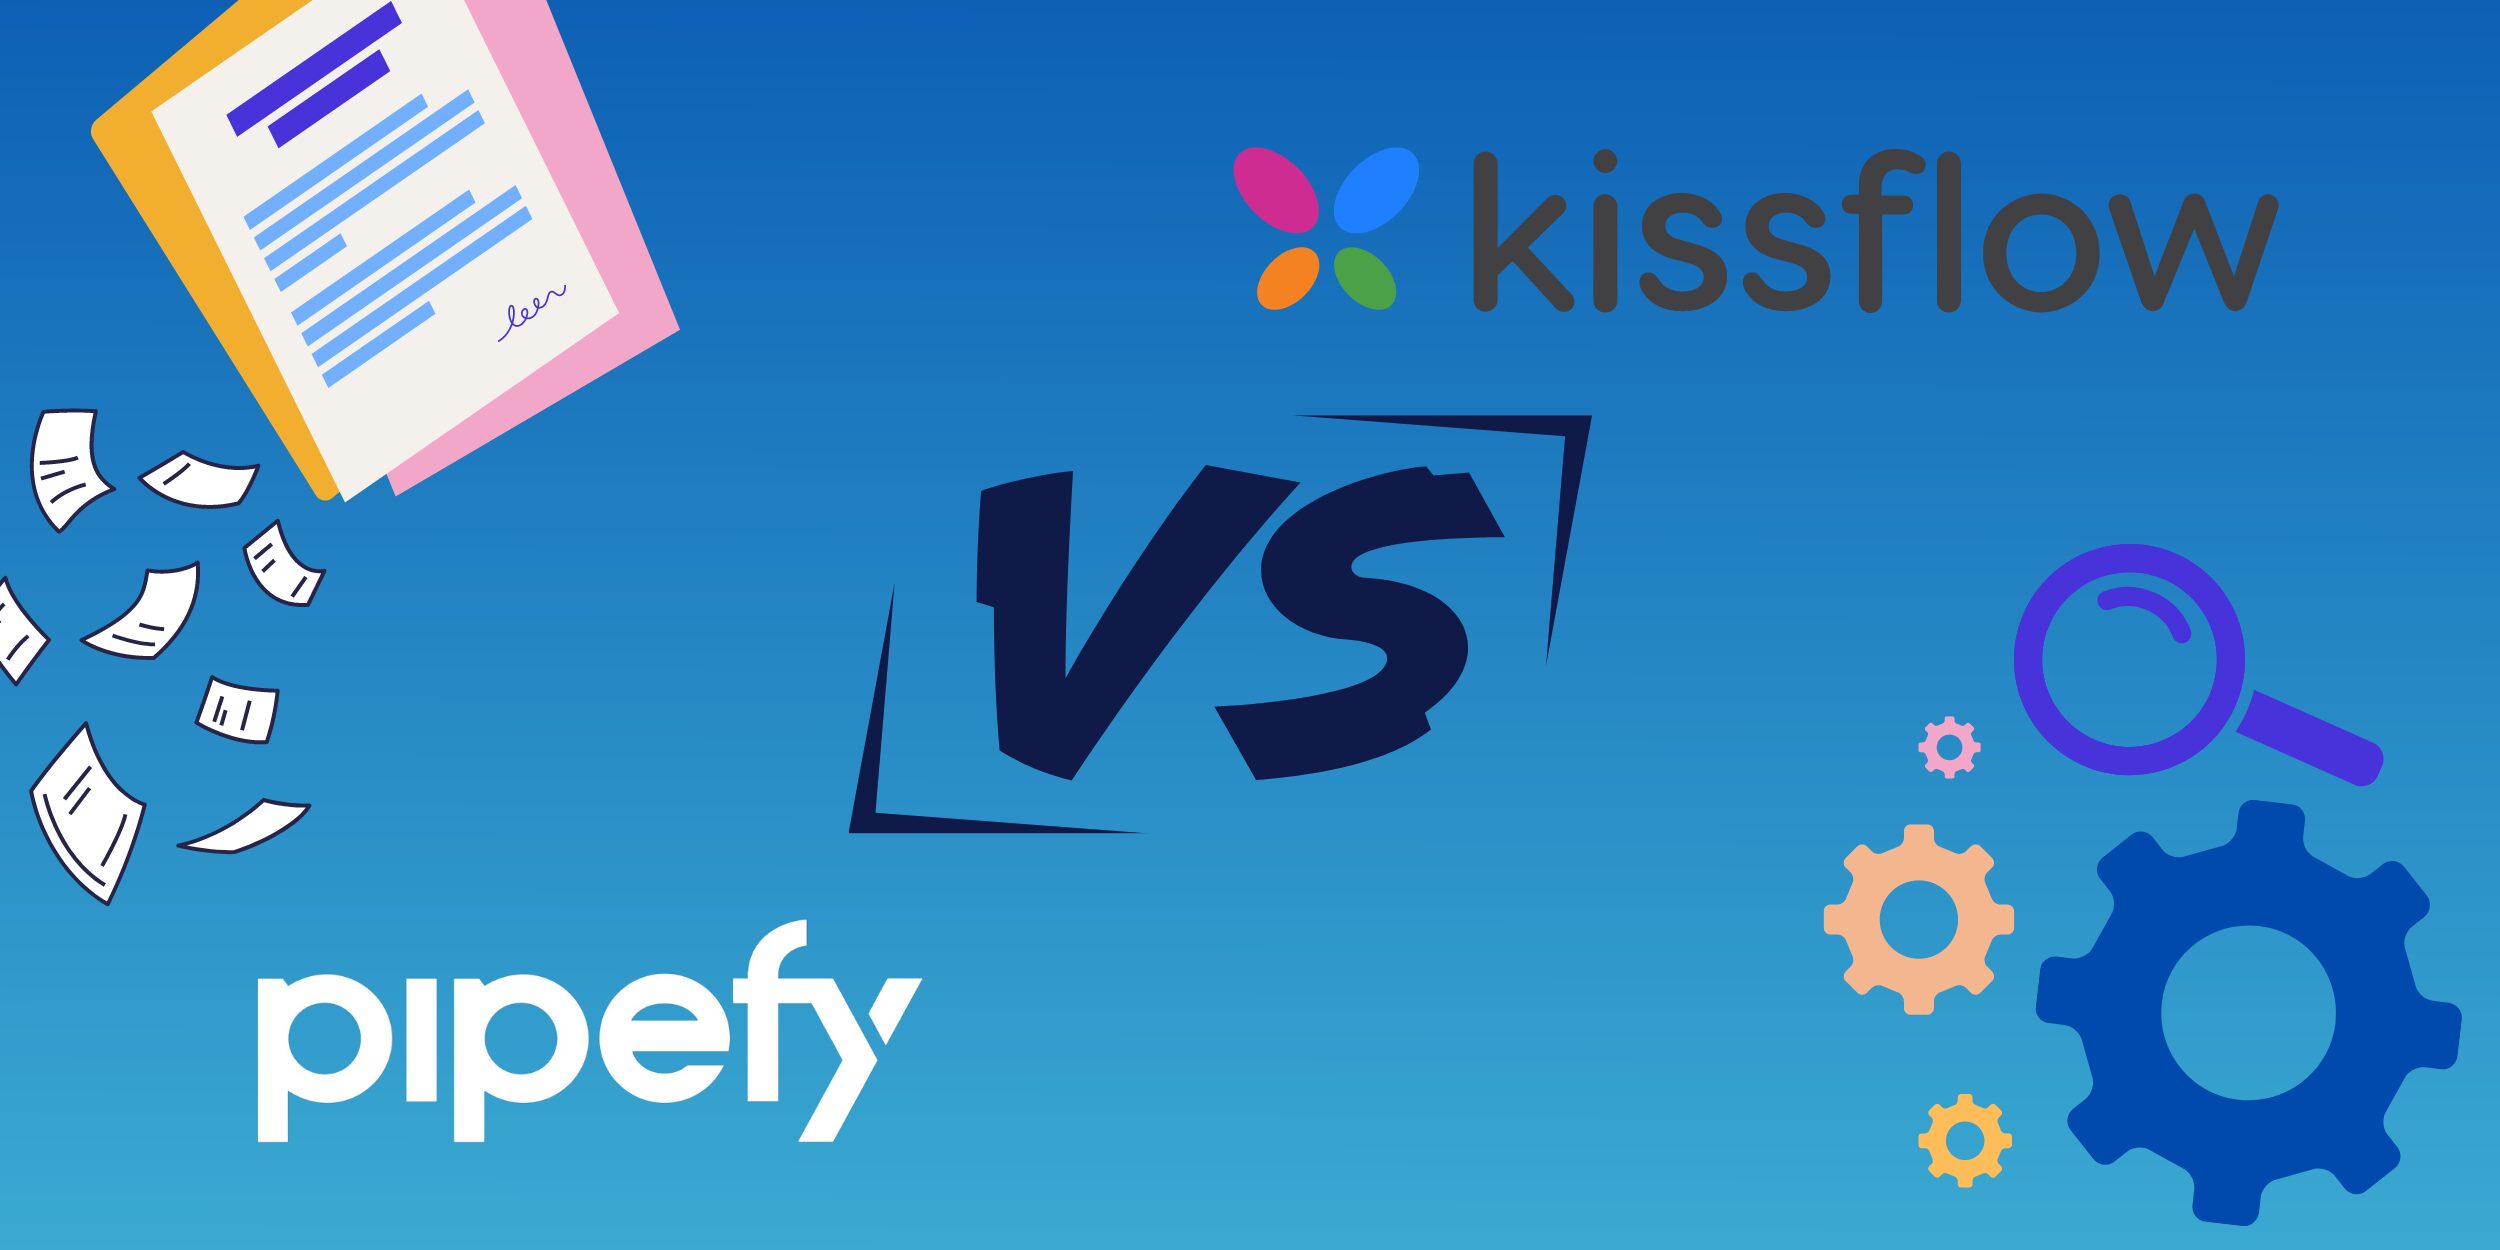 Pipefy Vs. Kissflow: Which Is Better for Managing Business Processes?